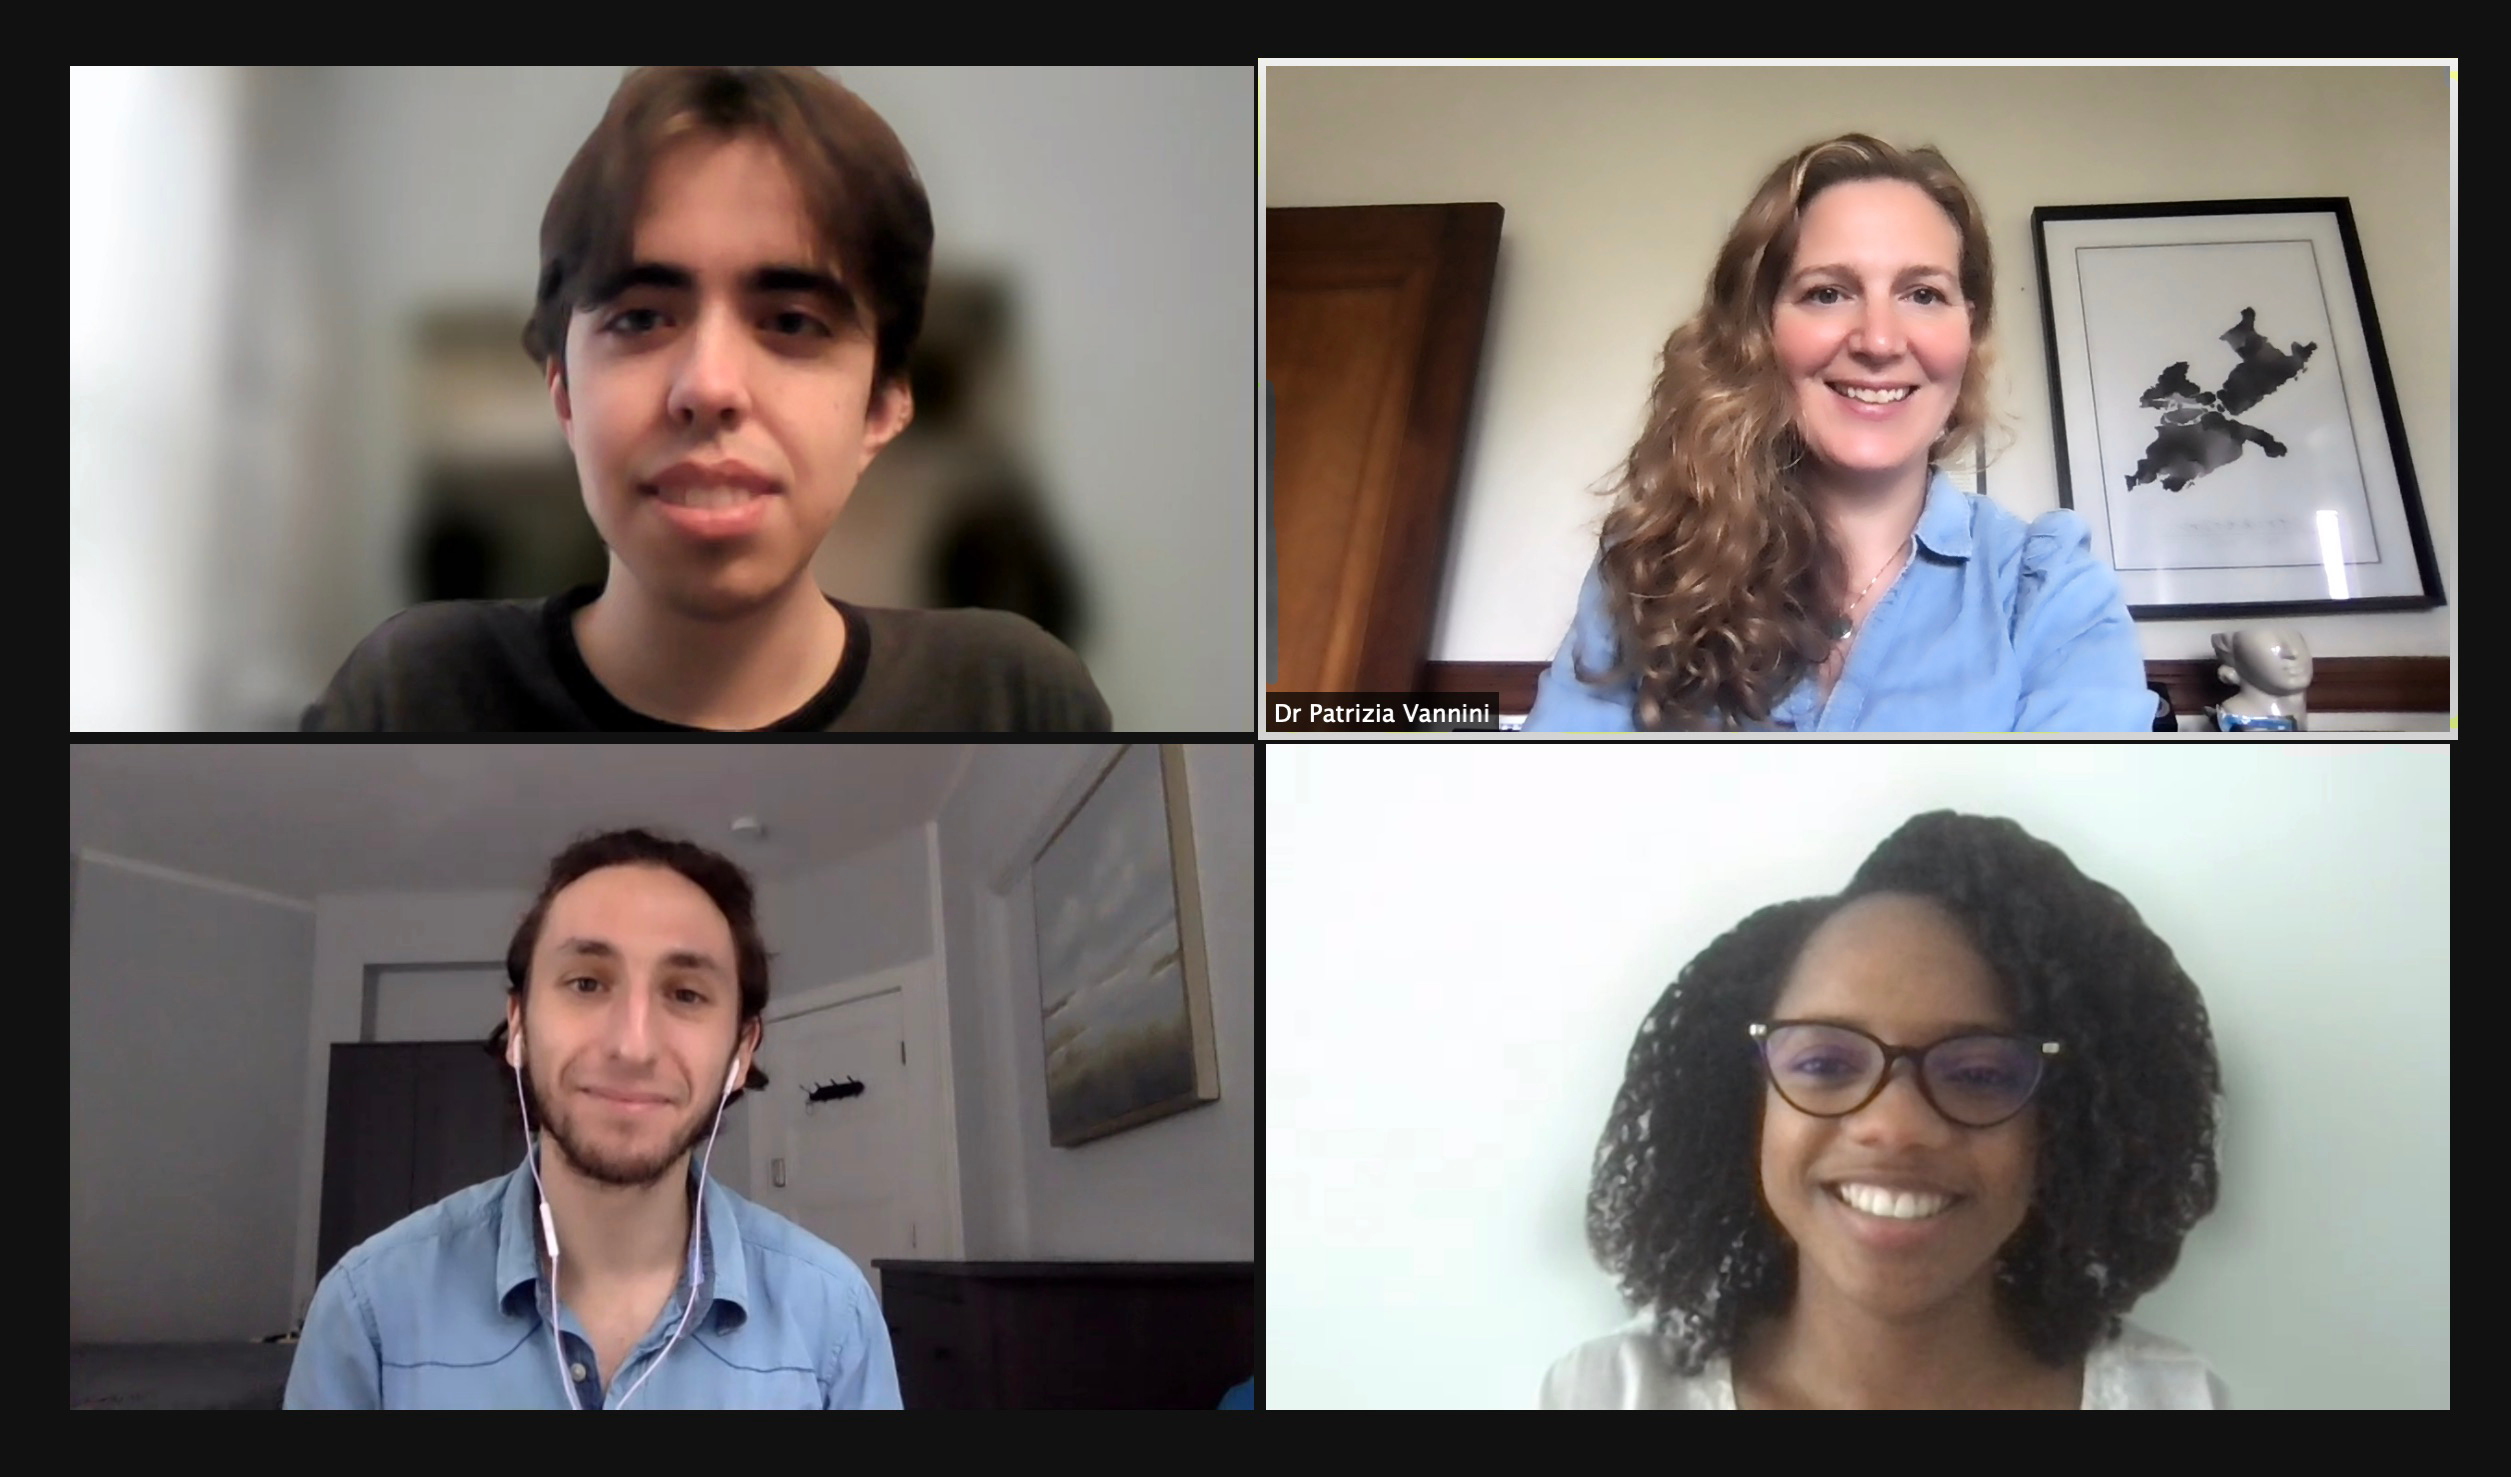 Zoom screenshot showing Patrizia Vannini with her research team, including her summer mentee.